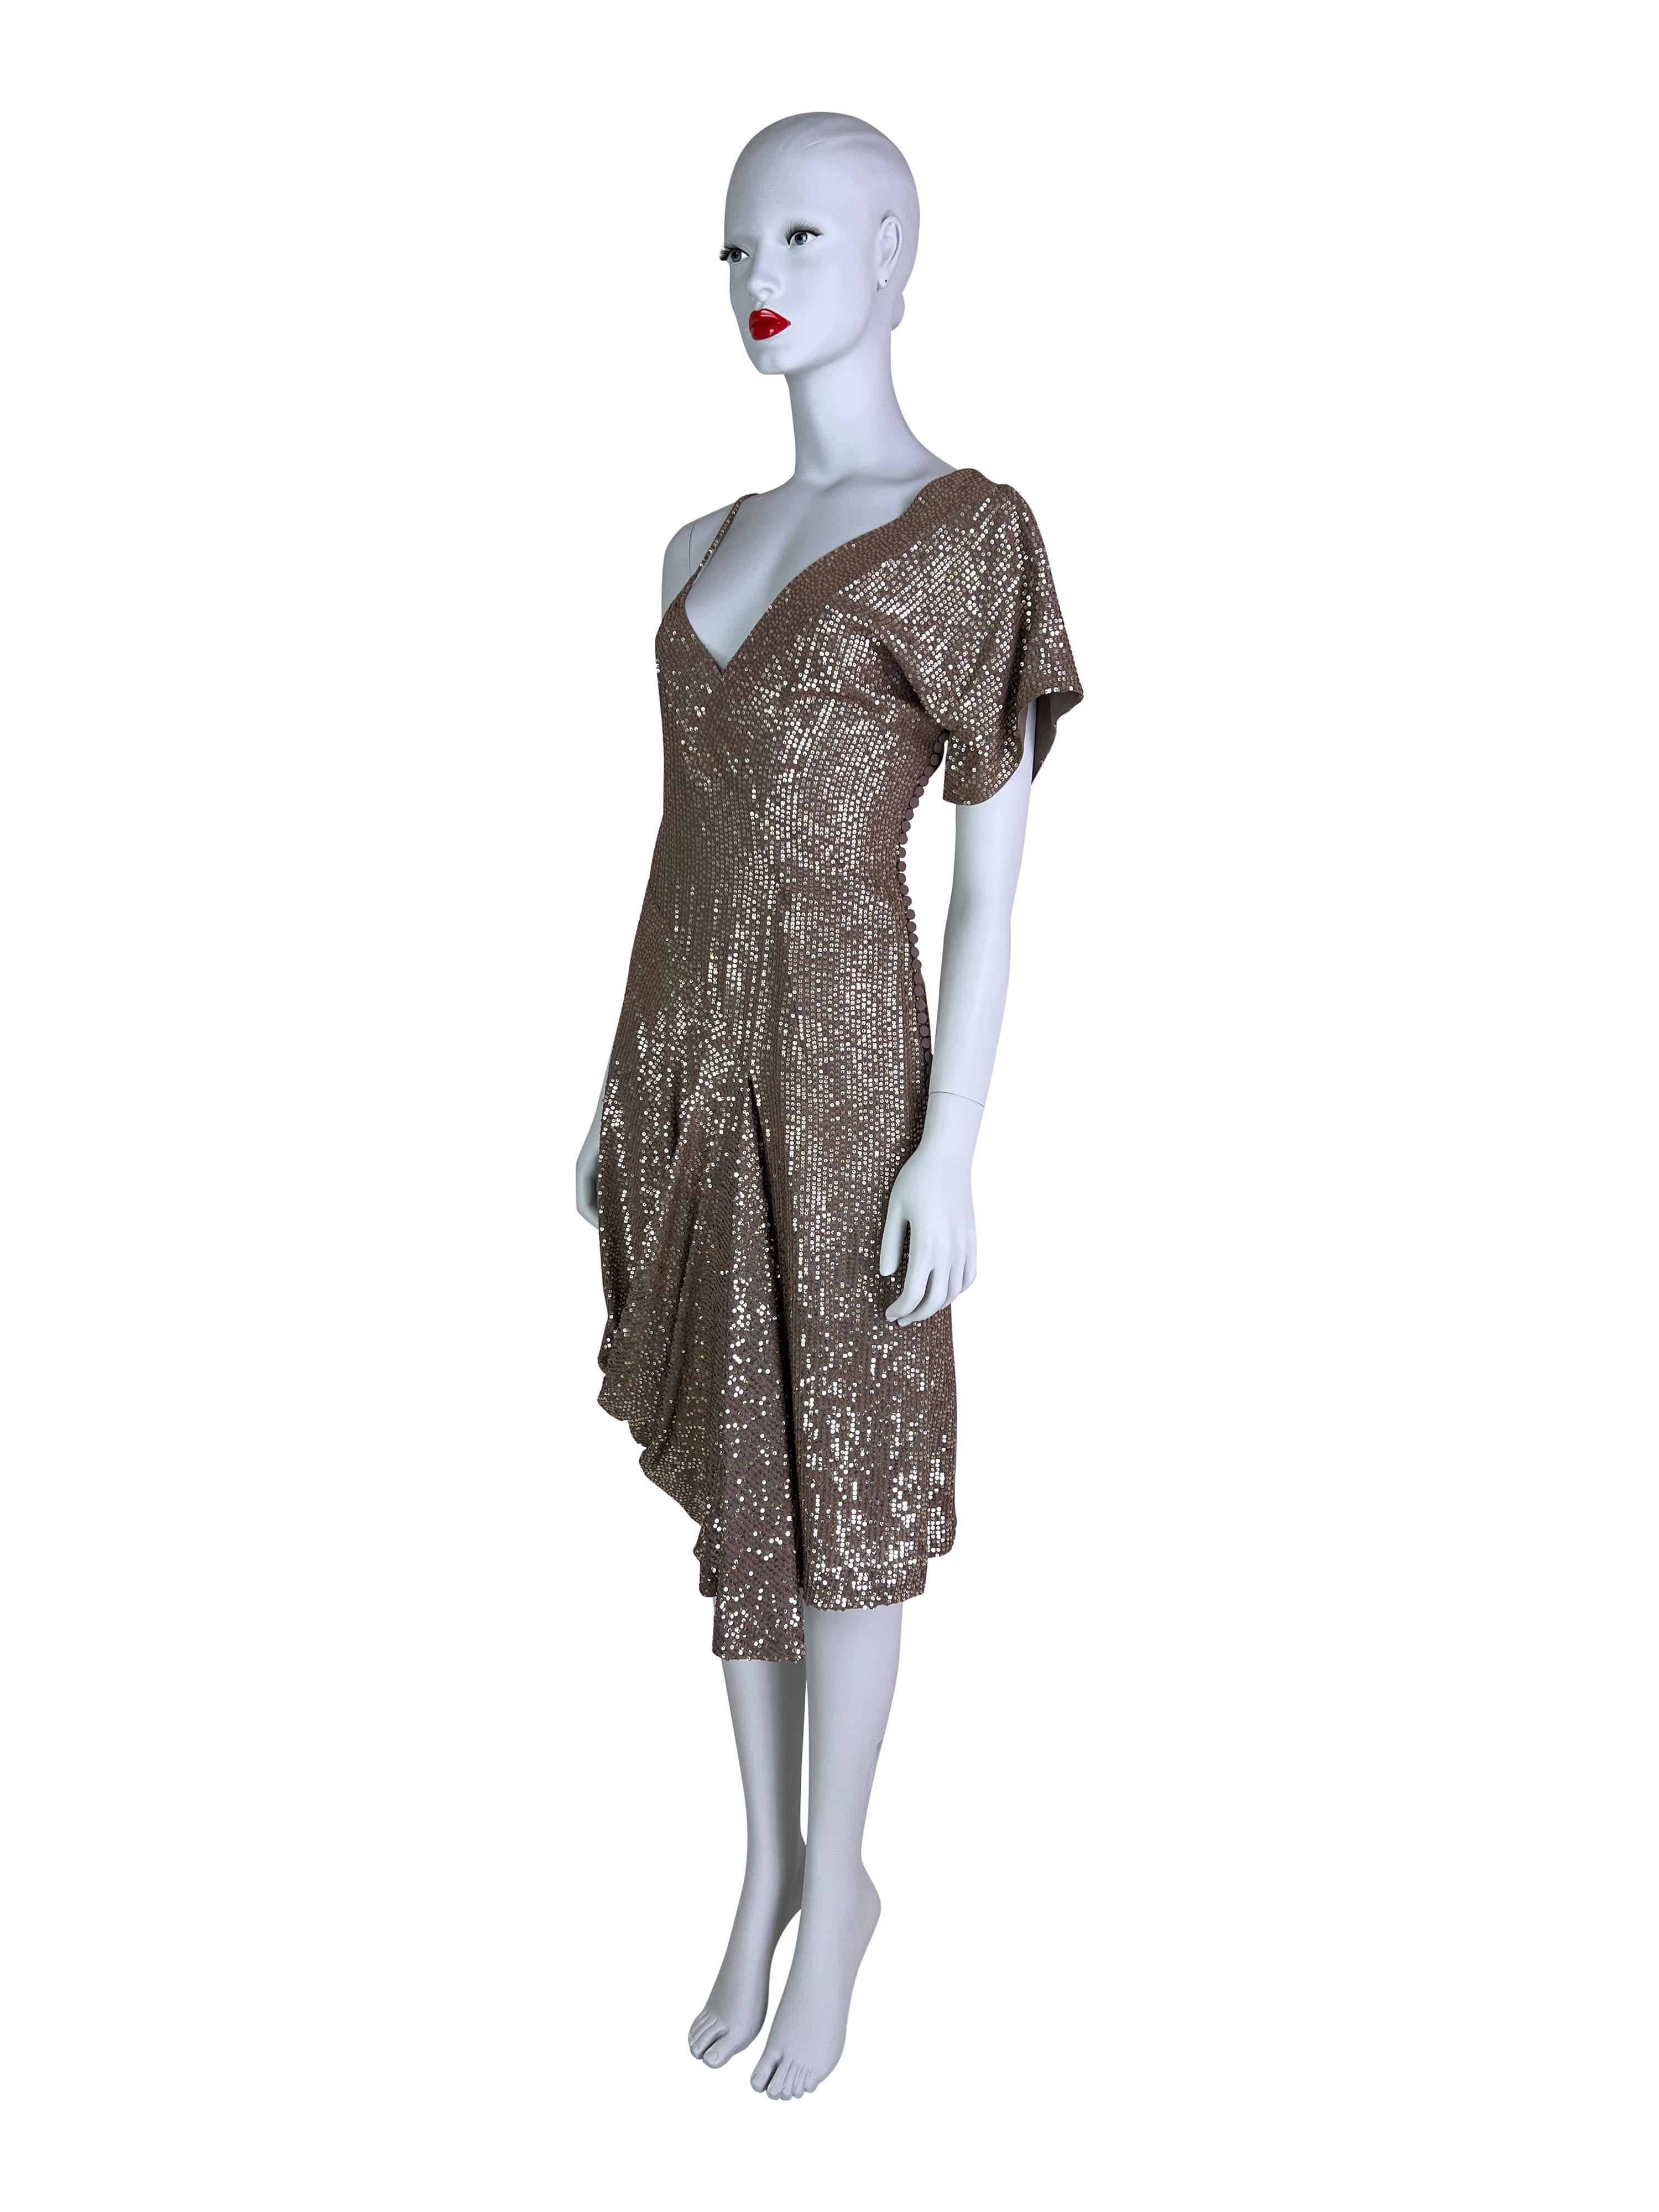 Dior by John Galliano Resort 2007 Sequin Dress For Sale 1